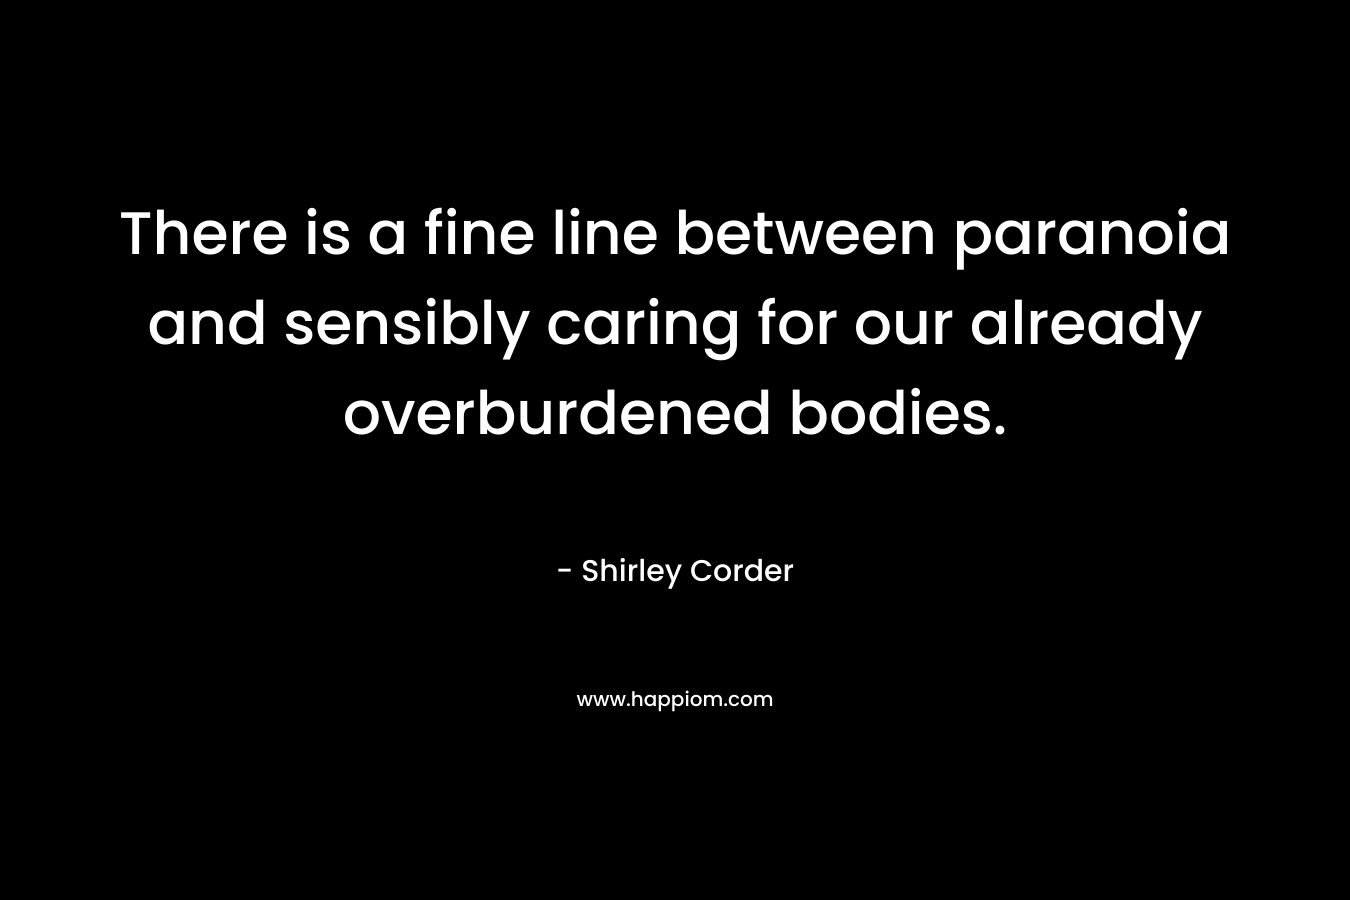 There is a fine line between paranoia and sensibly caring for our already overburdened bodies. – Shirley Corder